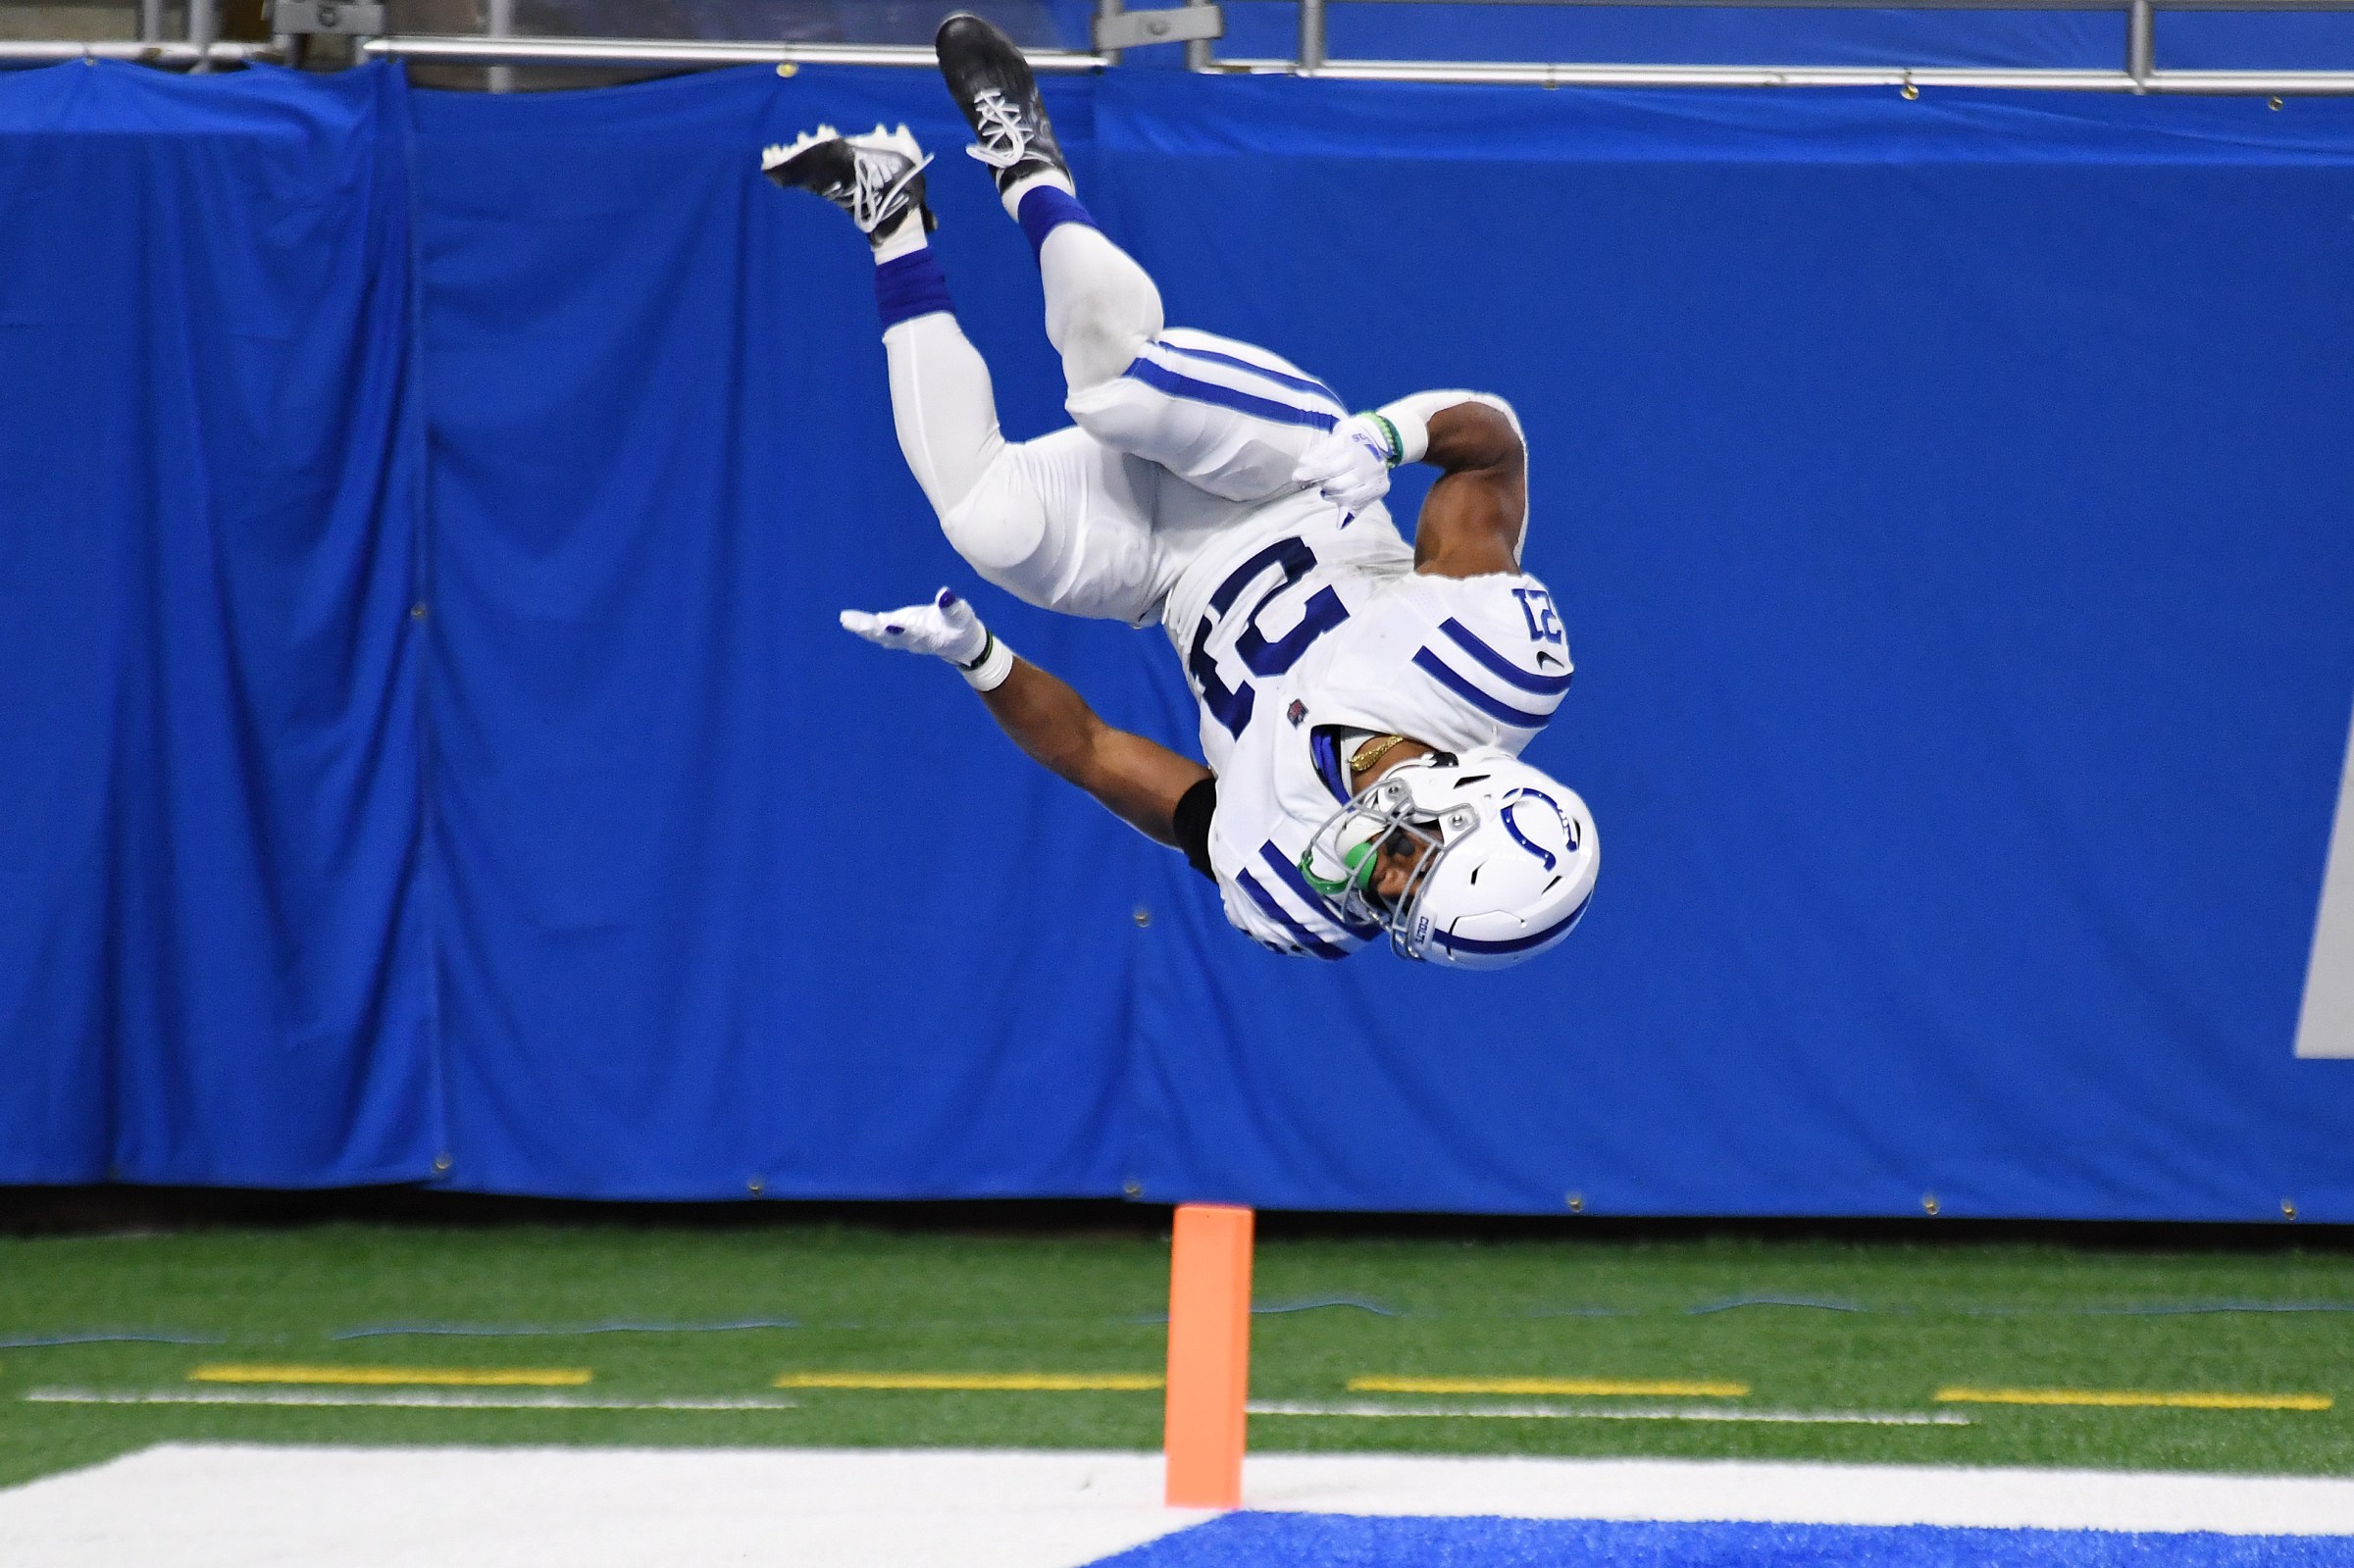 Colts player Nyheim Hines is caught suspended upside down during one of his touchdown celebration flips